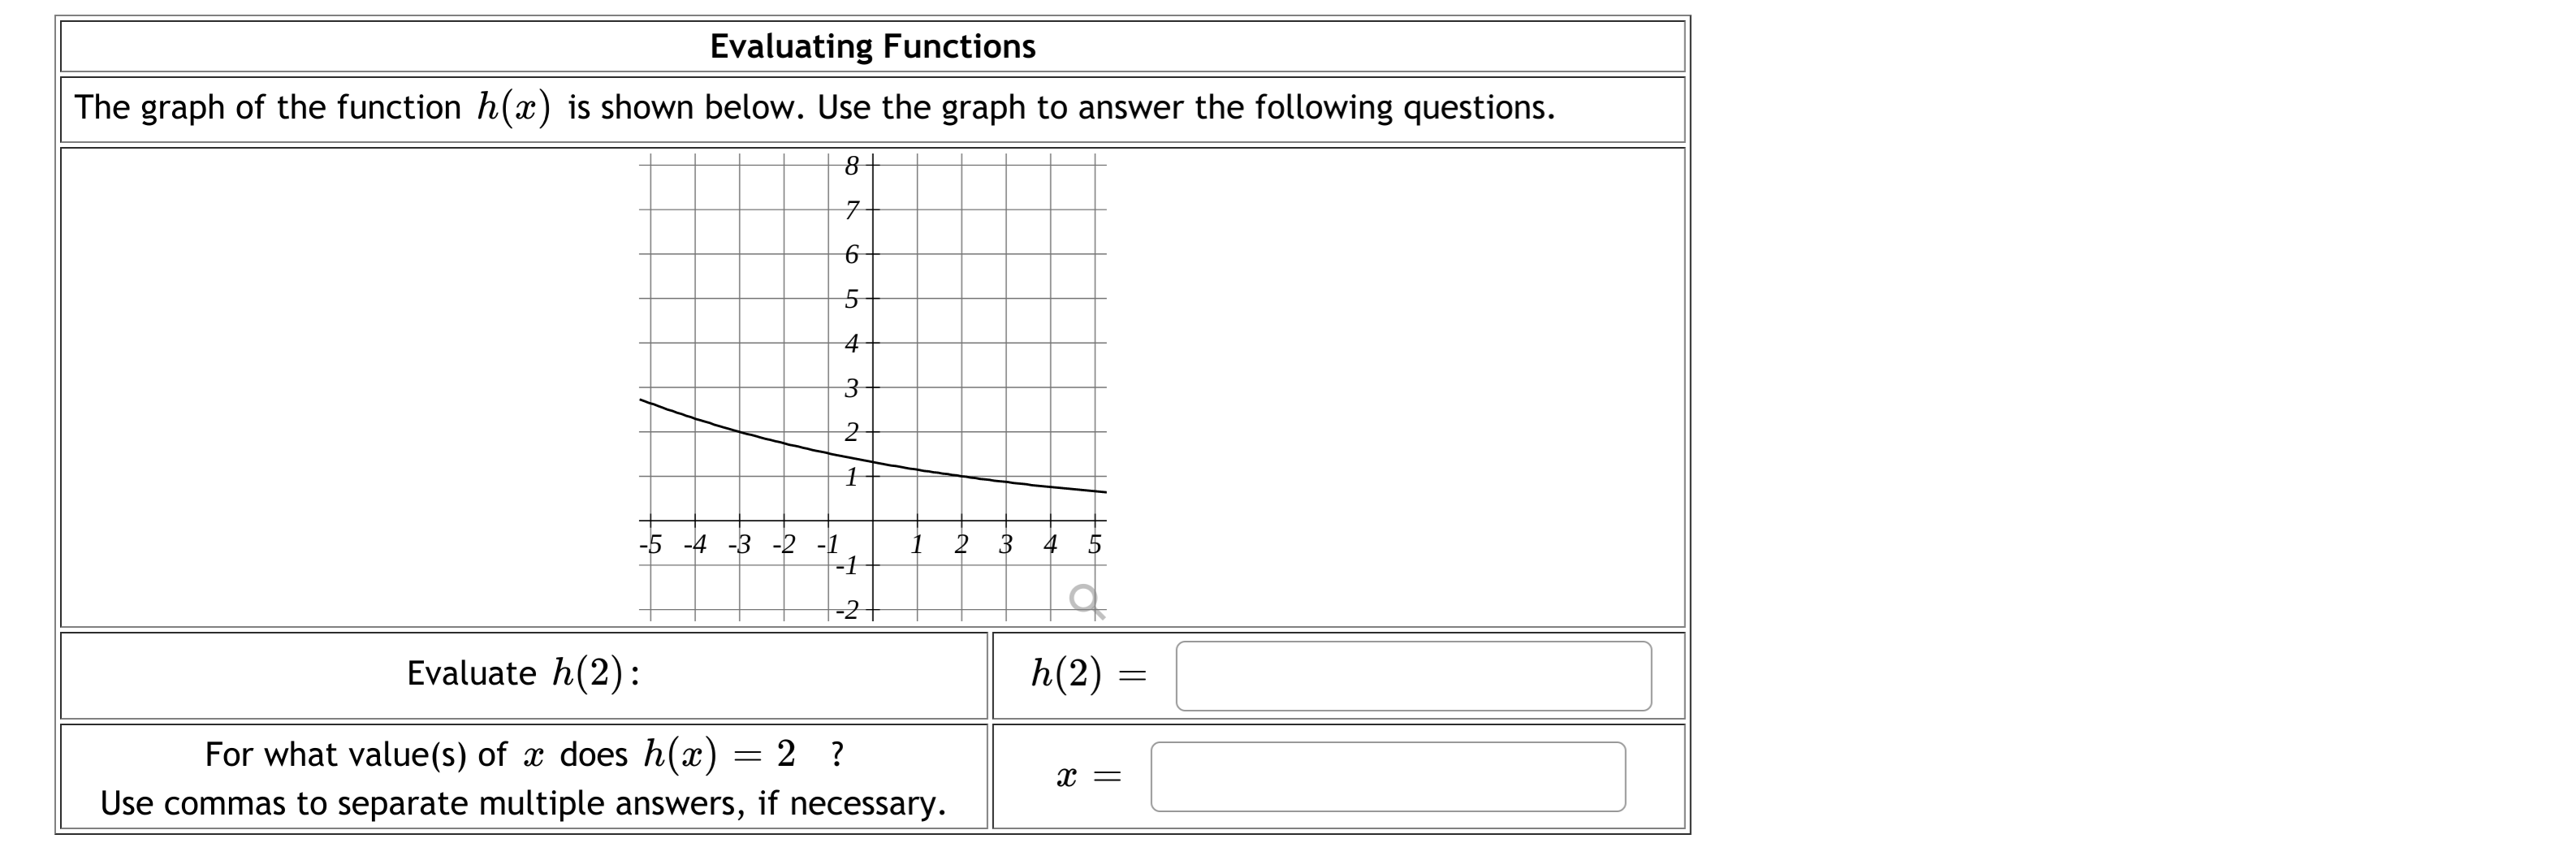 The graph of the function h(x) is shown below. Use the graph to answer the following questions.
4
3
-5 -4 -3 -2 -1
F-1
1 2 3 4 5
1-2+
Evaluate h(2):
h(2) =
For what value(s) of x does h(x) = 2 ?
Use commas to separate multiple answers, if necessary.
x =
